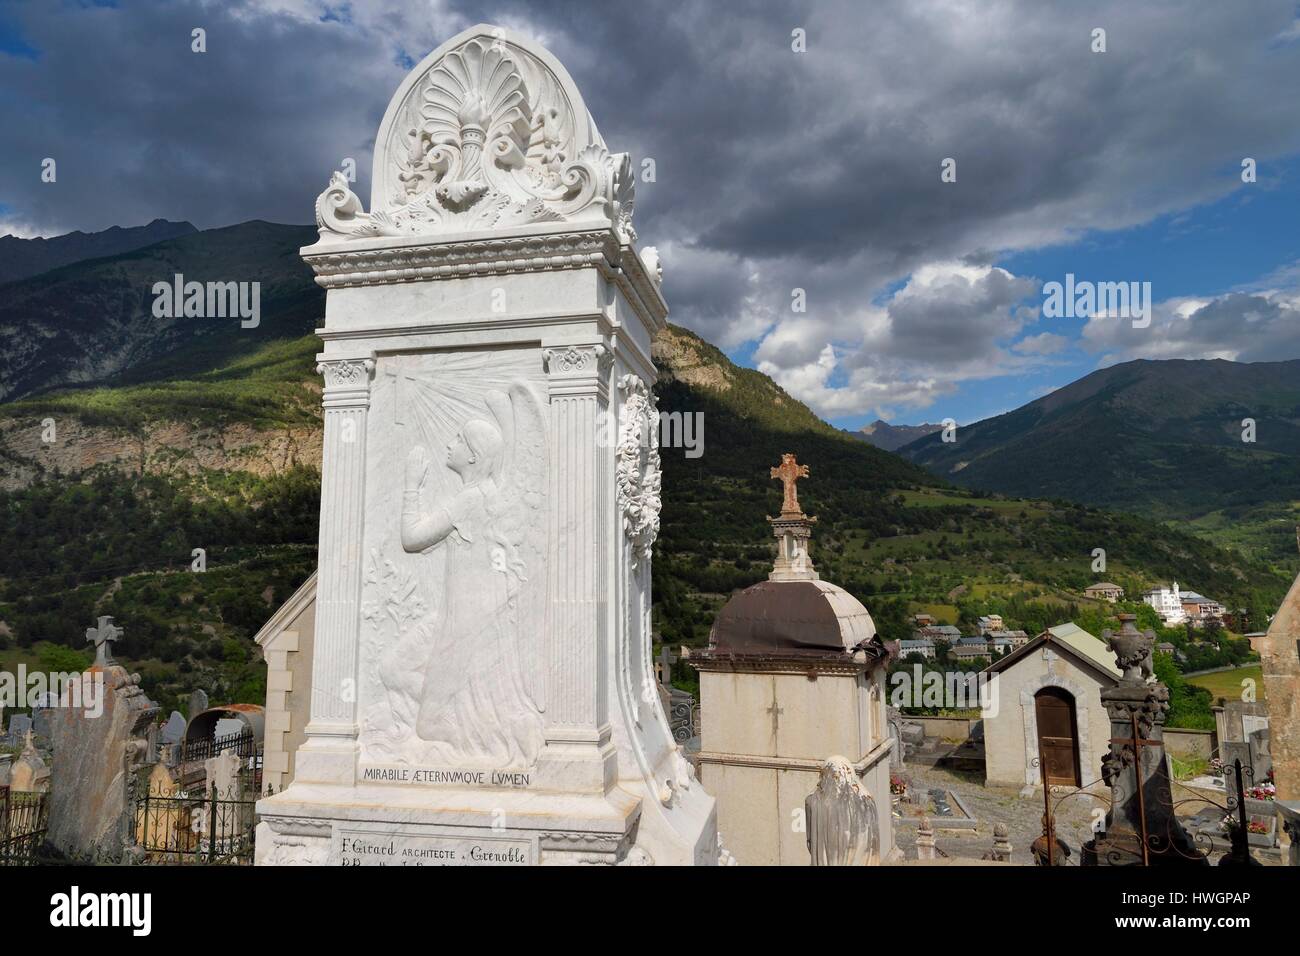 France, Alpes de Haute Provence, Ubaye valley, Jausiers cemetery, grave of the four brothers Audiffred, former traders and shop owners of the Al Puerto de Liverpool in the city of Morelia in Mexico, the mexican villa known as the castle of Magnans in the background Stock Photo